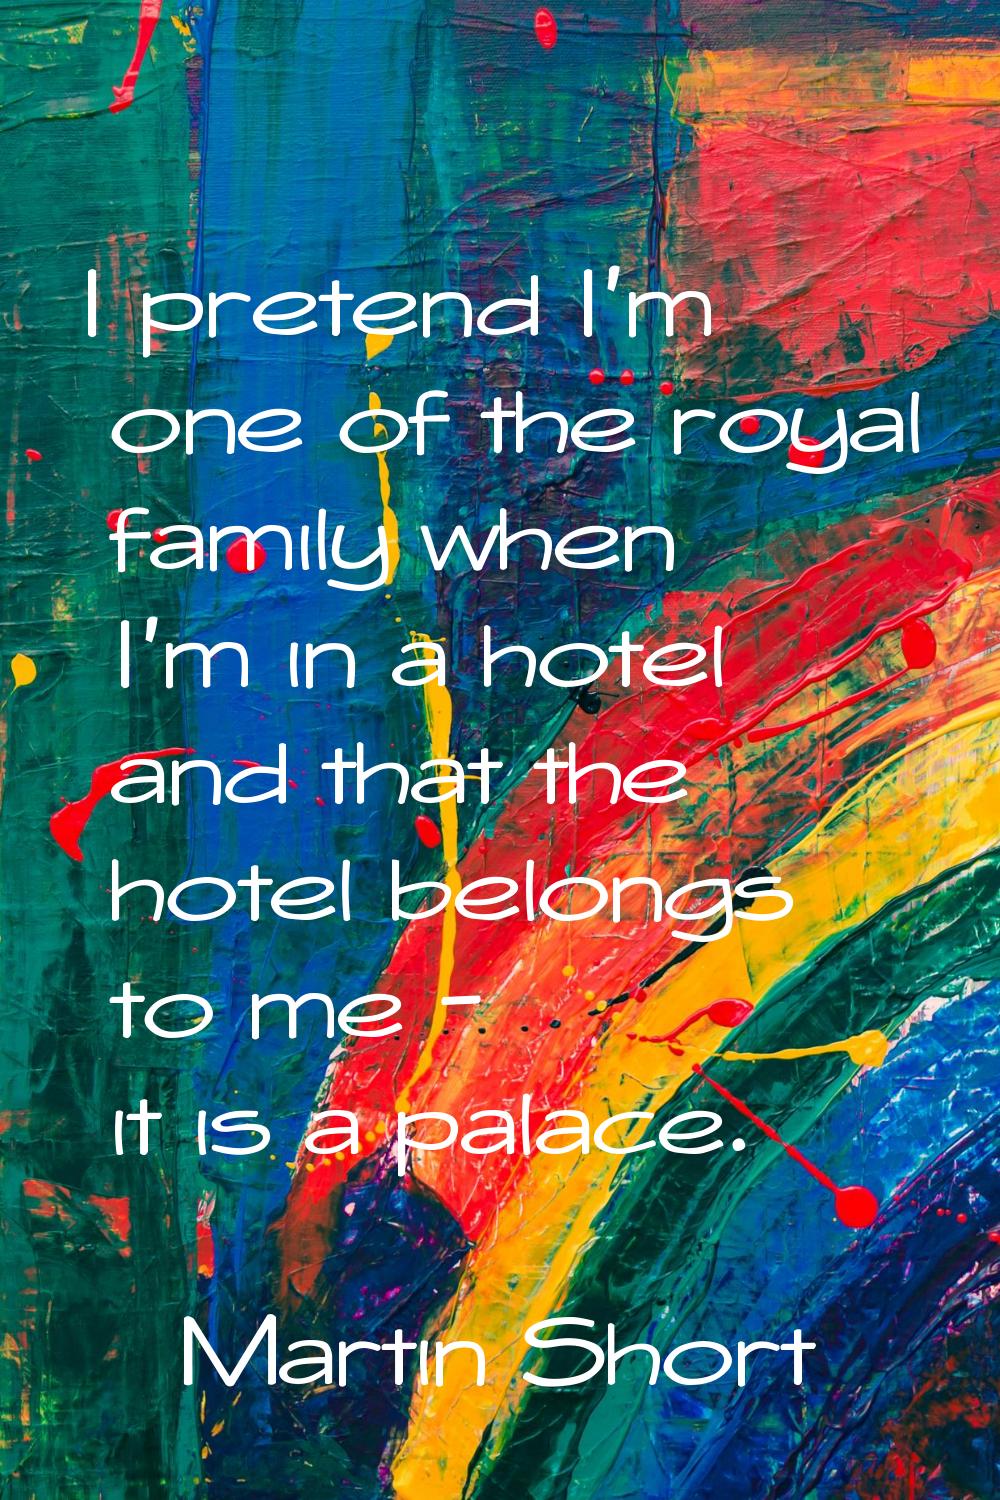 I pretend I'm one of the royal family when I'm in a hotel and that the hotel belongs to me - it is 